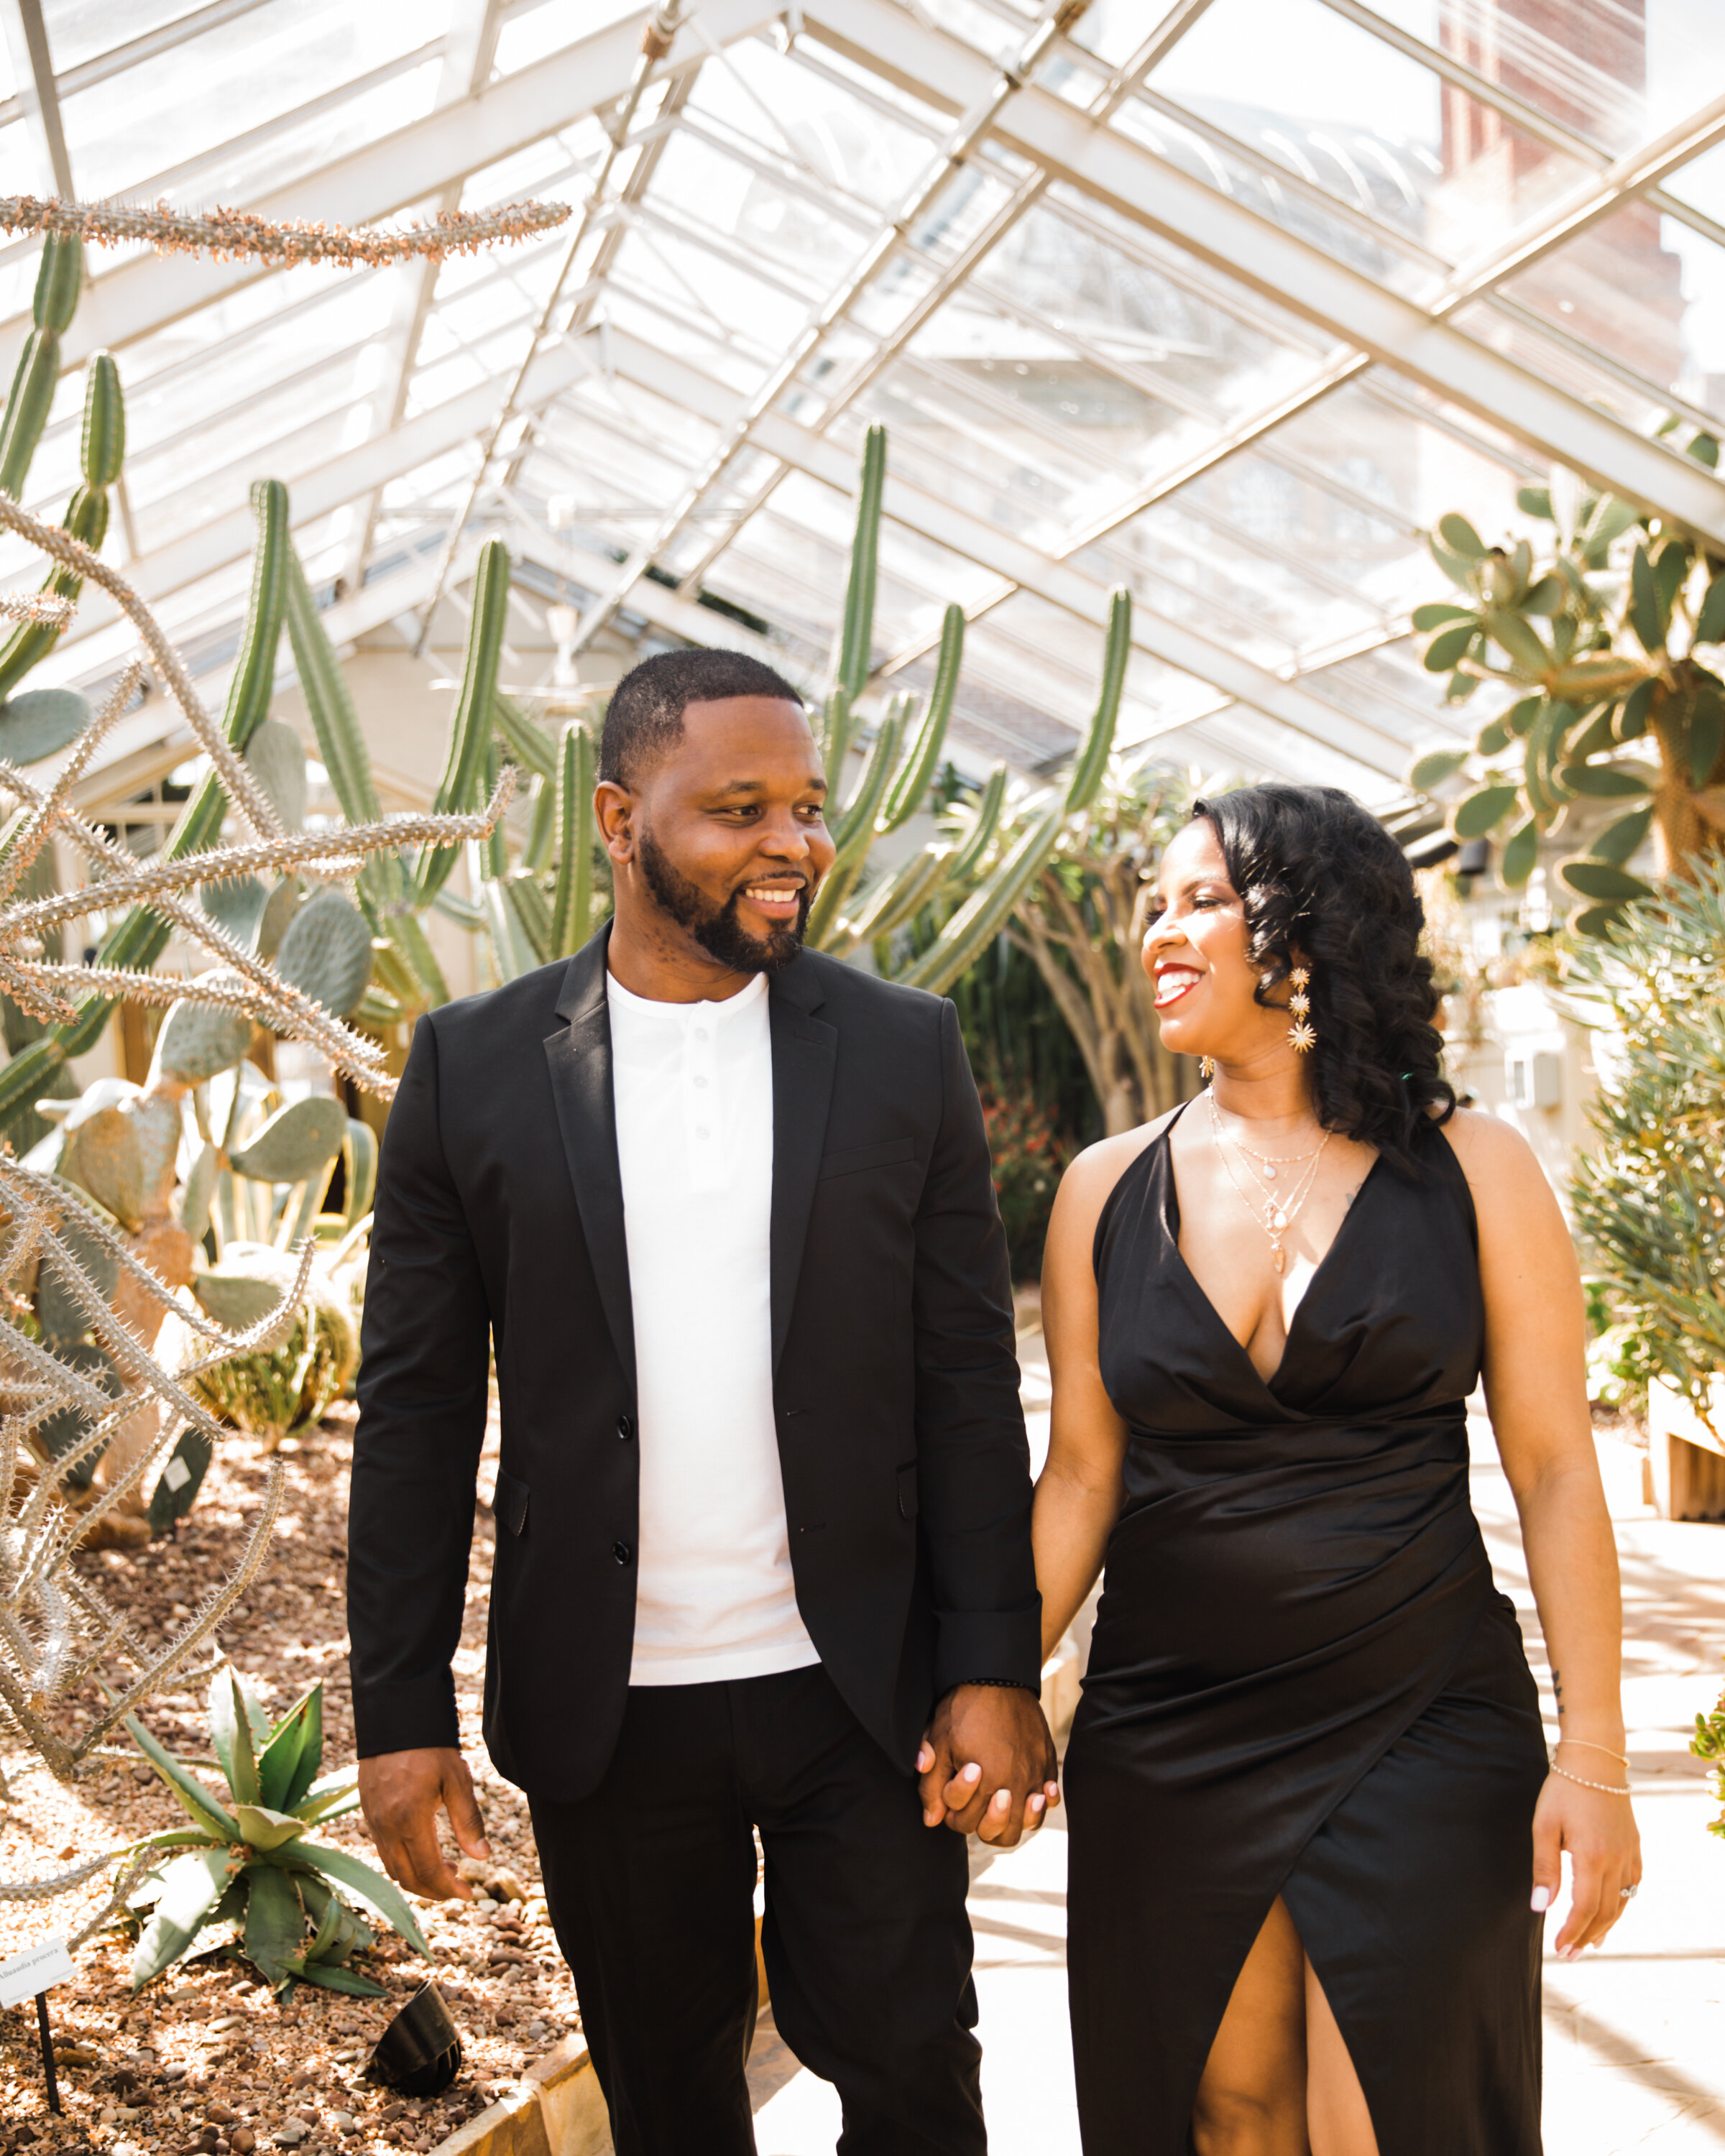 Best Wedding Photographers in Baltimore Free Engagement Session Maryland Megapixels Media Photography Rawlings Conservatory Engagement Photos Black Dress Black Couple in Love-3.jpg